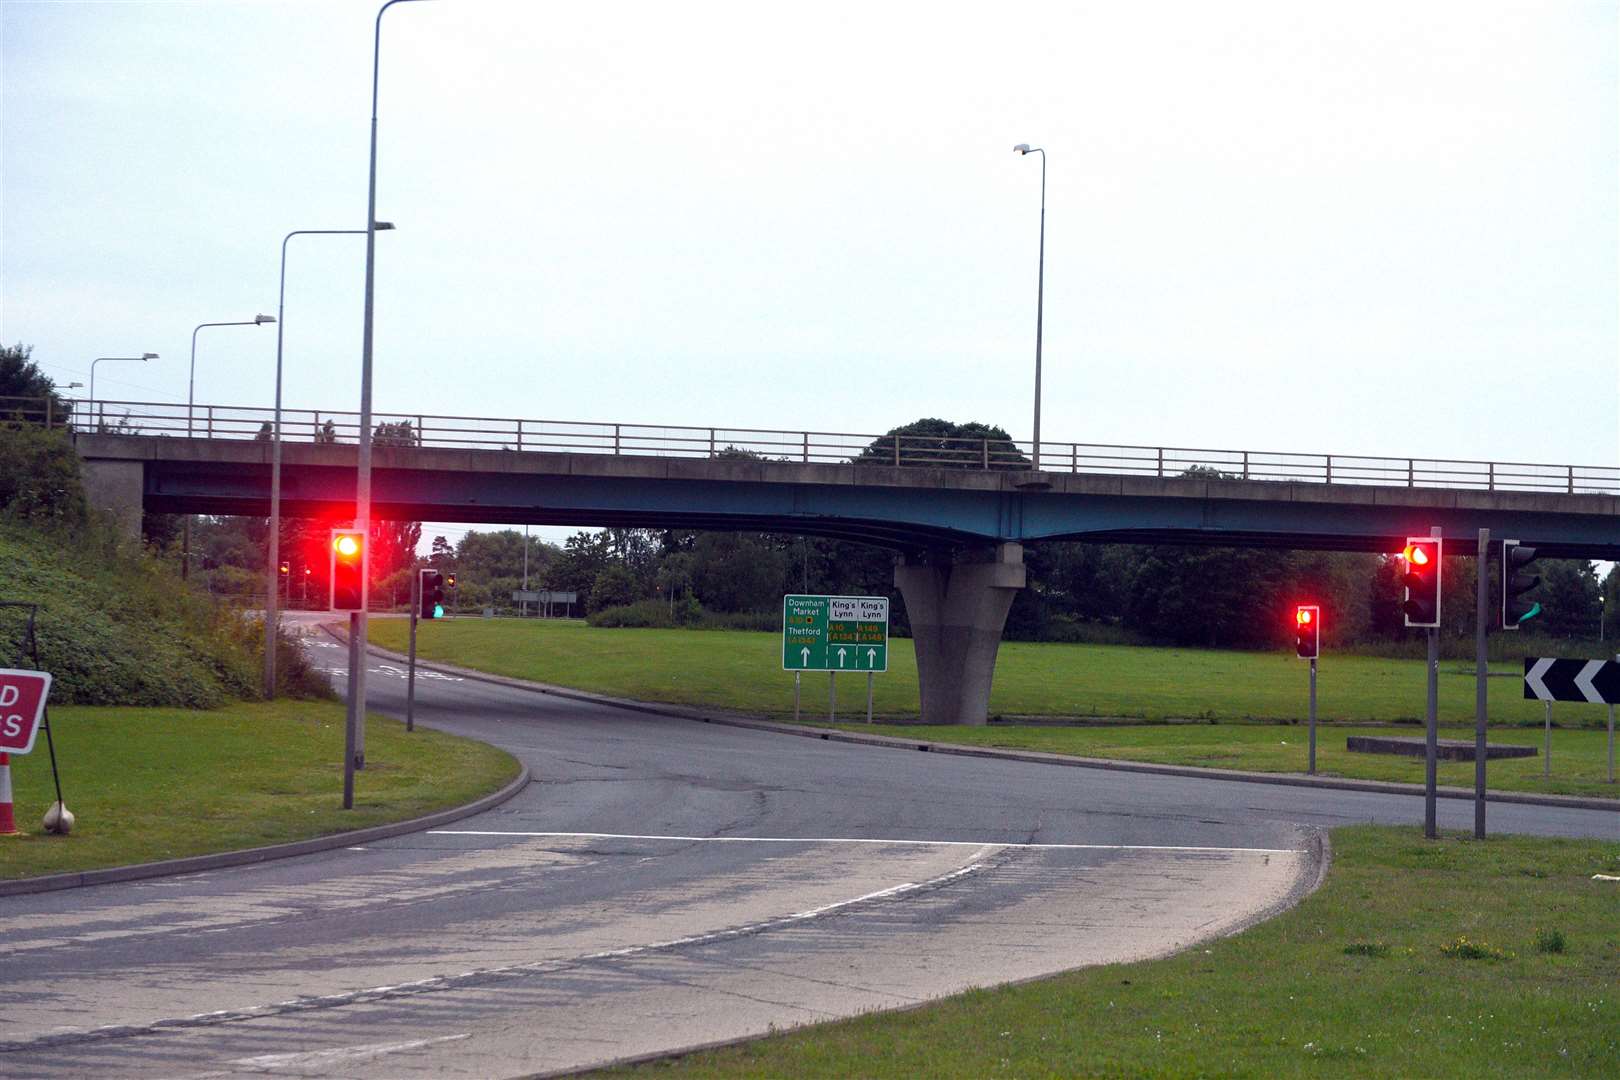 The Hardwick roundabout in Lynn, where the crash occurred on Saturday